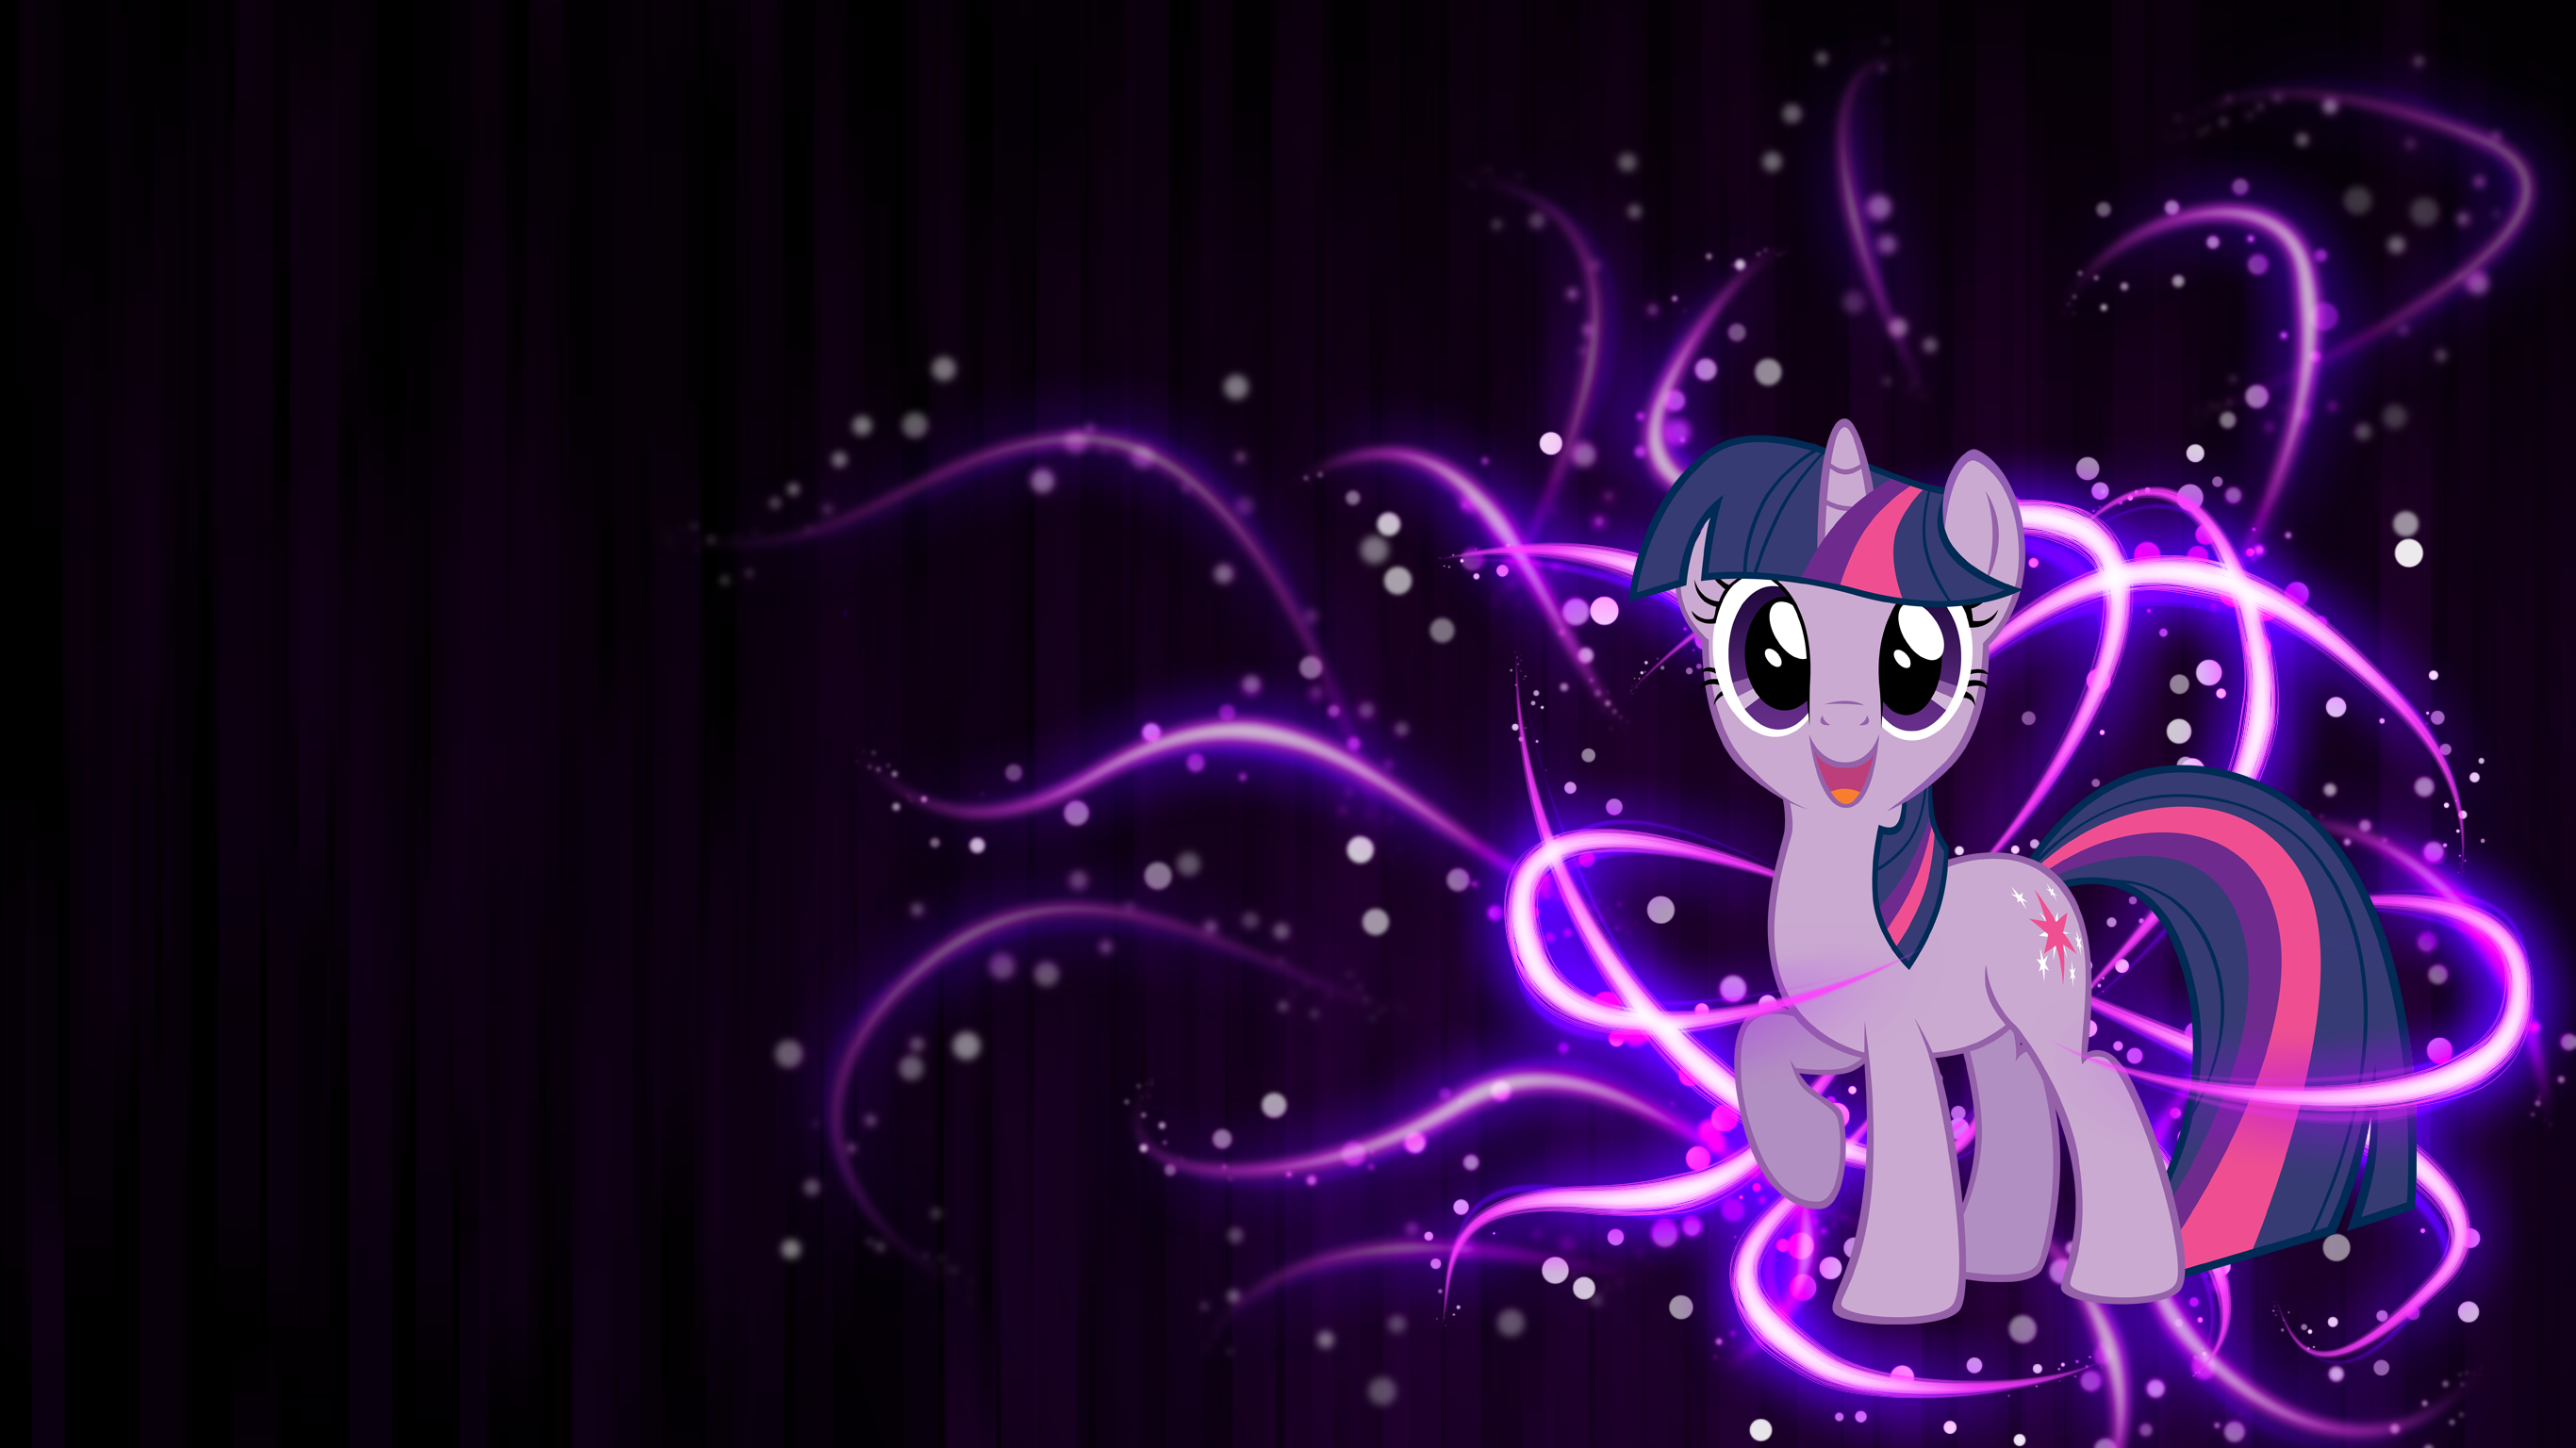 Free download Twilight Sparkle Wallpaper by piranhaplant1 [2732x1536] for your Desktop, Mobile & Tablet. Explore Twilight Sparkle Wallpaper. Sparkle Wallpaper for Desktop, Princess Twilight Sparkle Wallpaper, My Little Pony Wallpaper 1920x1080